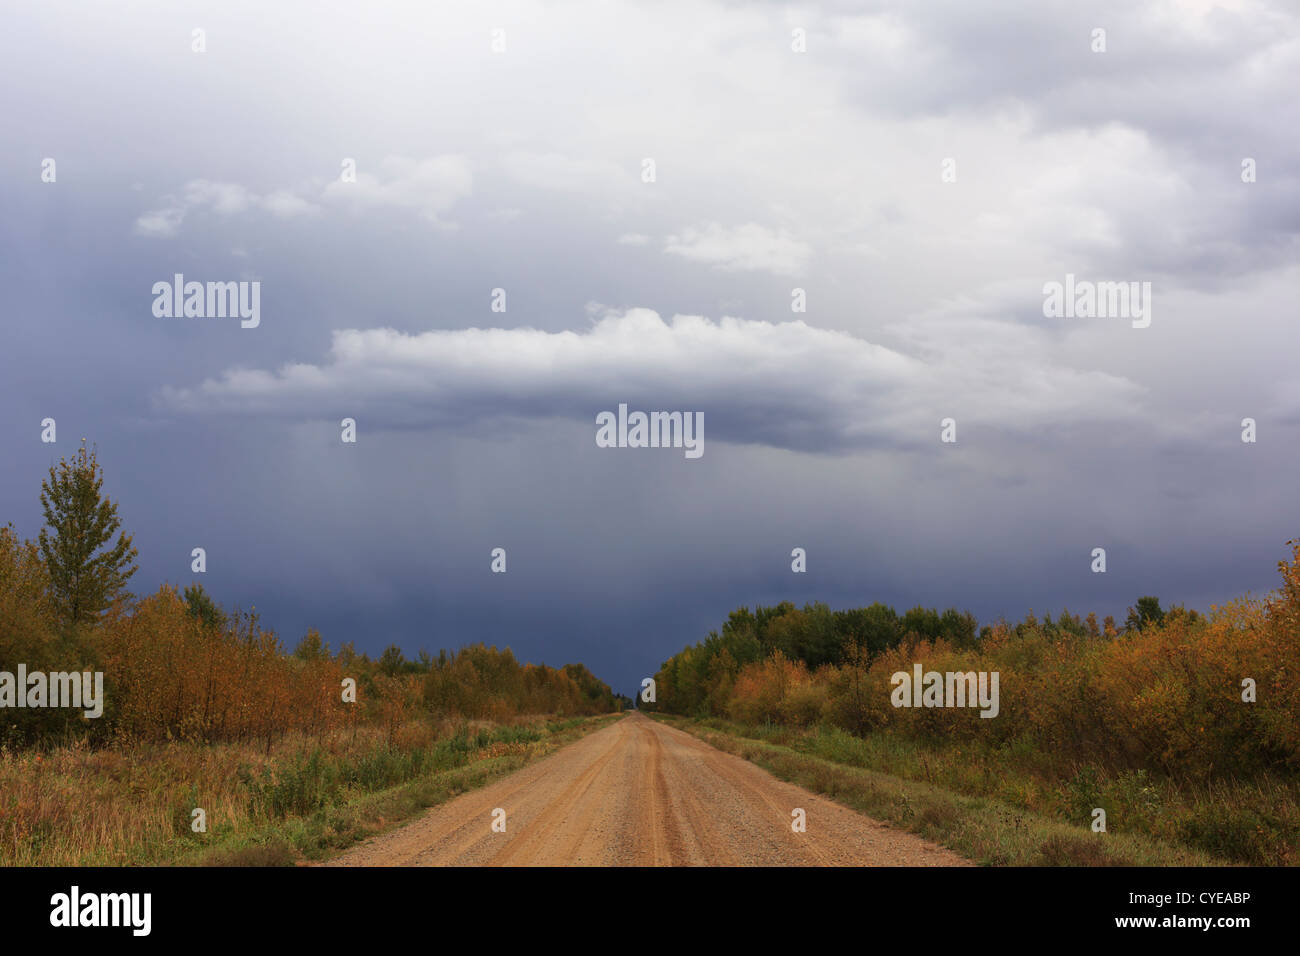 Rural road in Northern Minnesota under storm clouds. Stock Photo